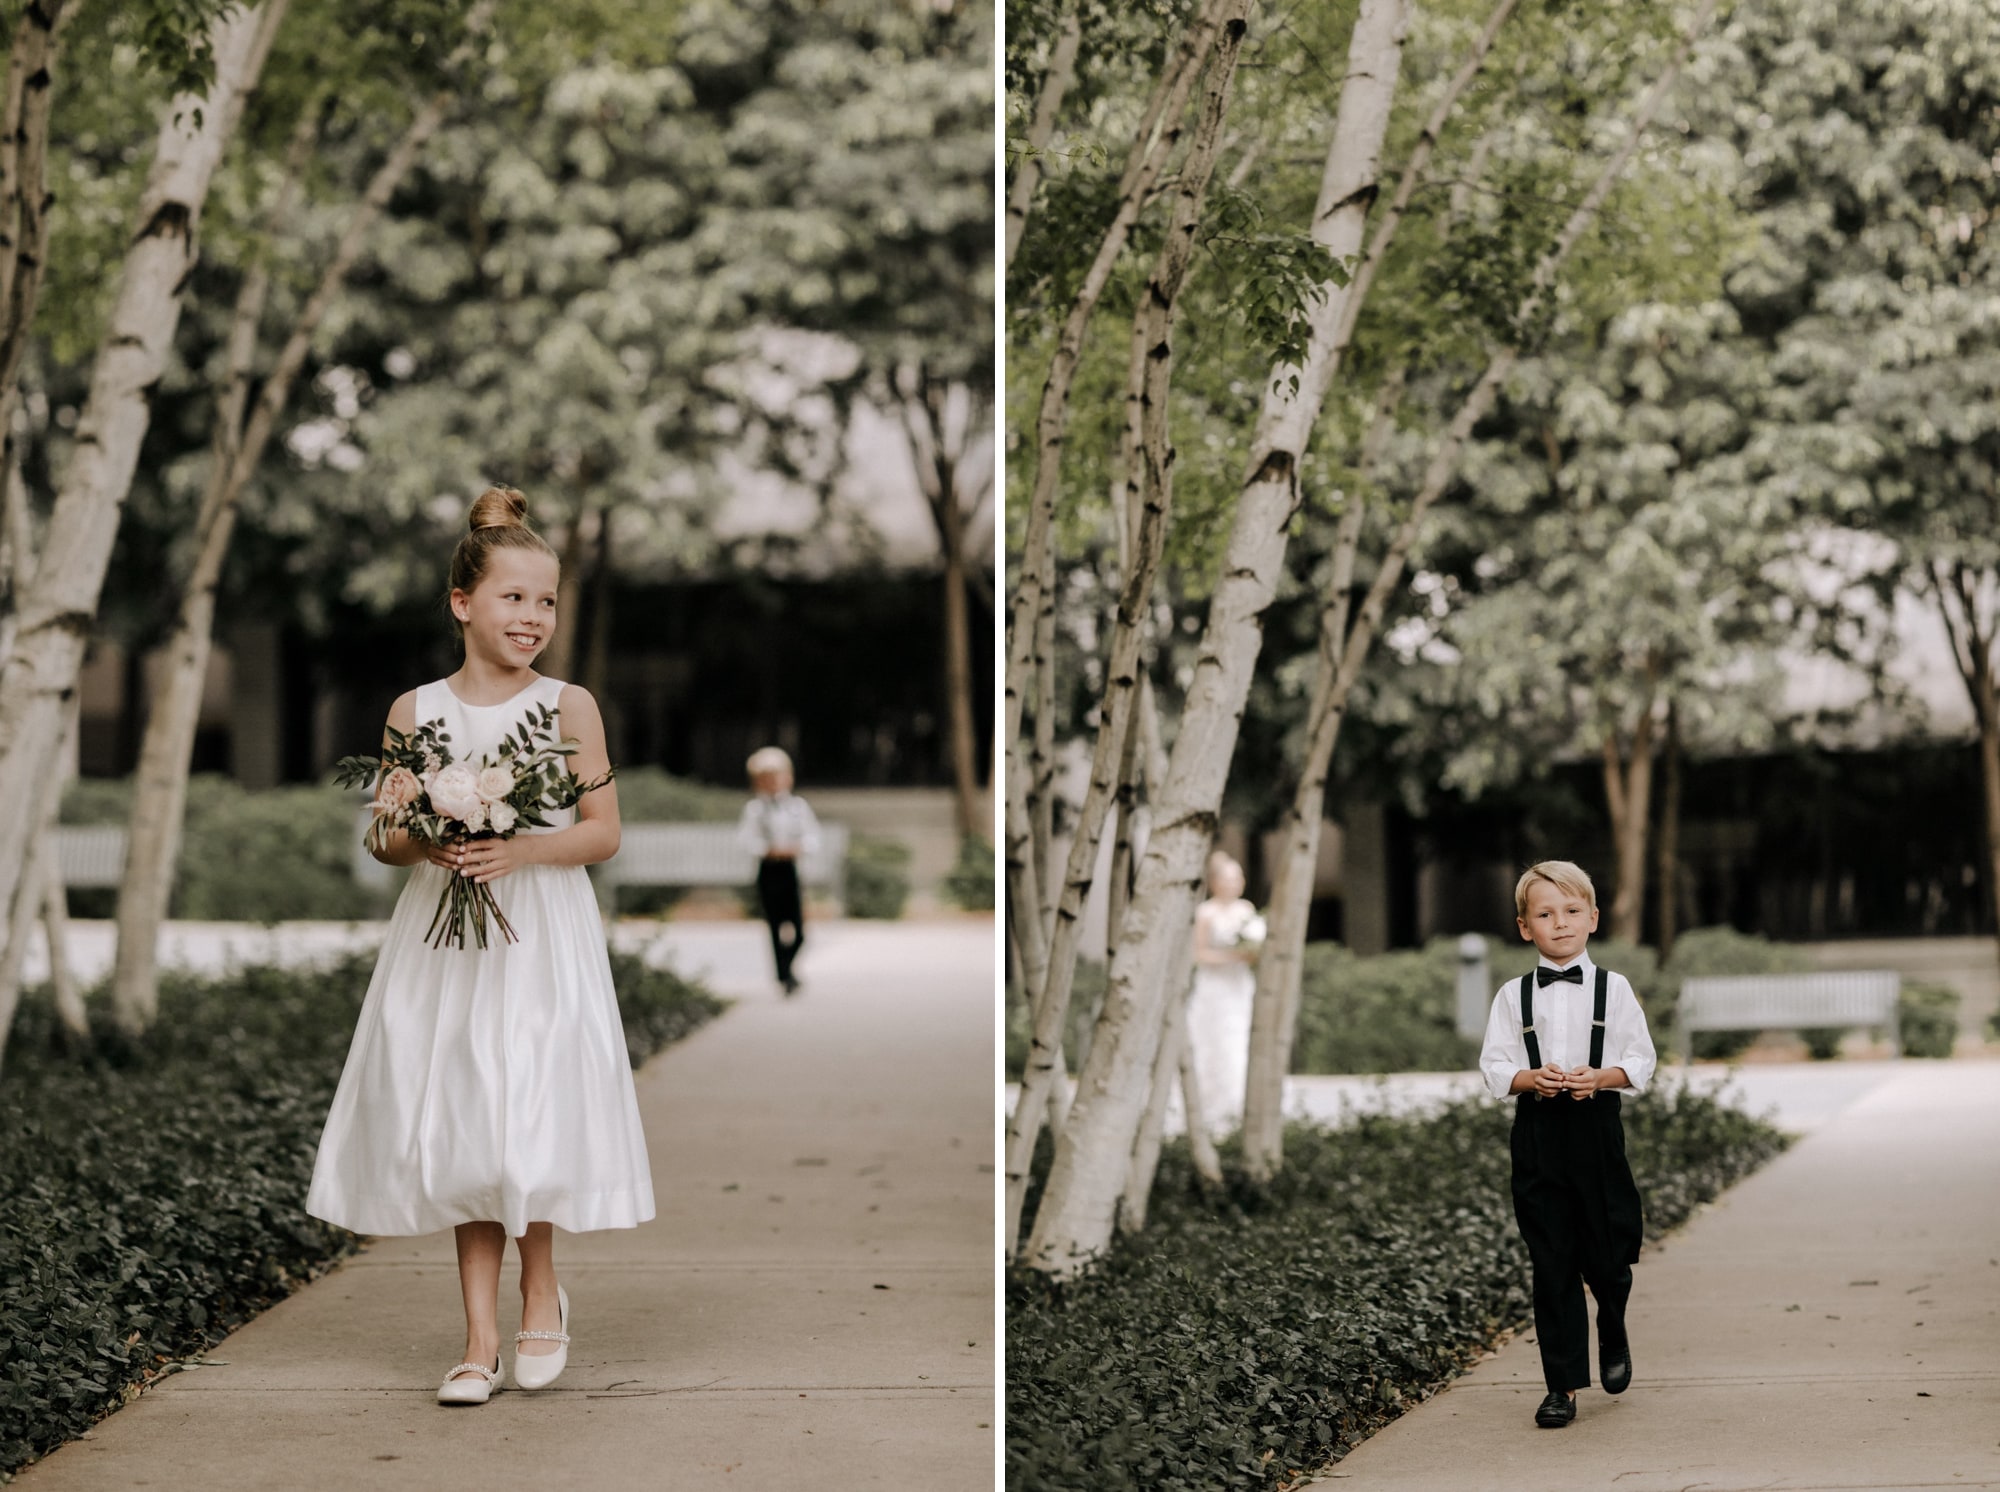 An adorable flower girl wearing a white dress walks down the aisle during an outdoor wedding ceremony at Minneapolis Institute of Art.